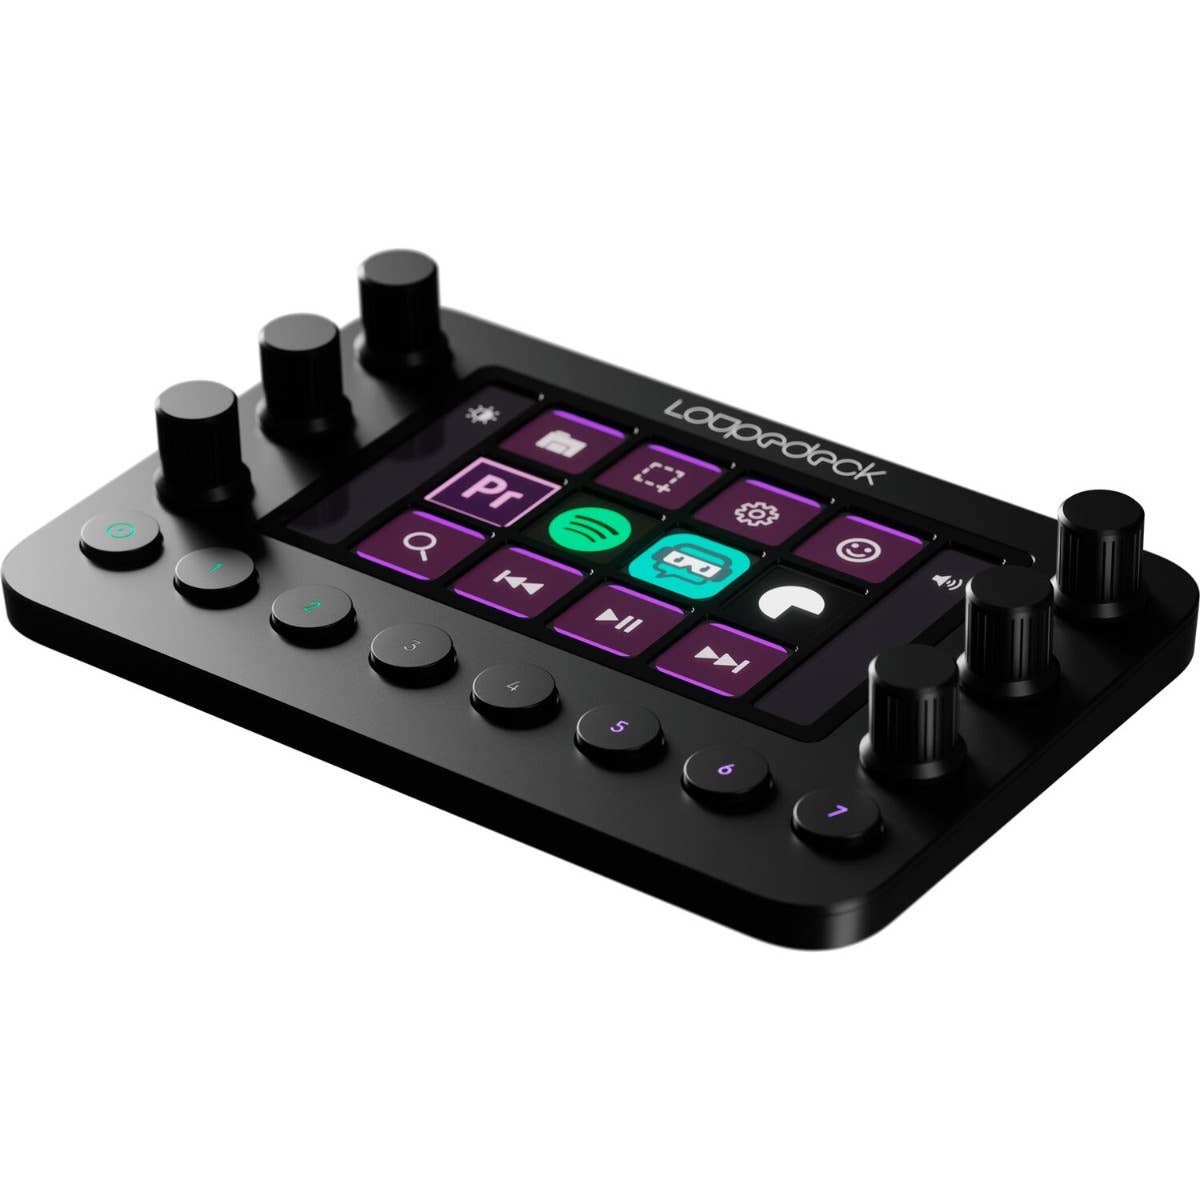 Loupedeck Live Photo/Video Editing and Streaming Console - Store 974 | ستور ٩٧٤